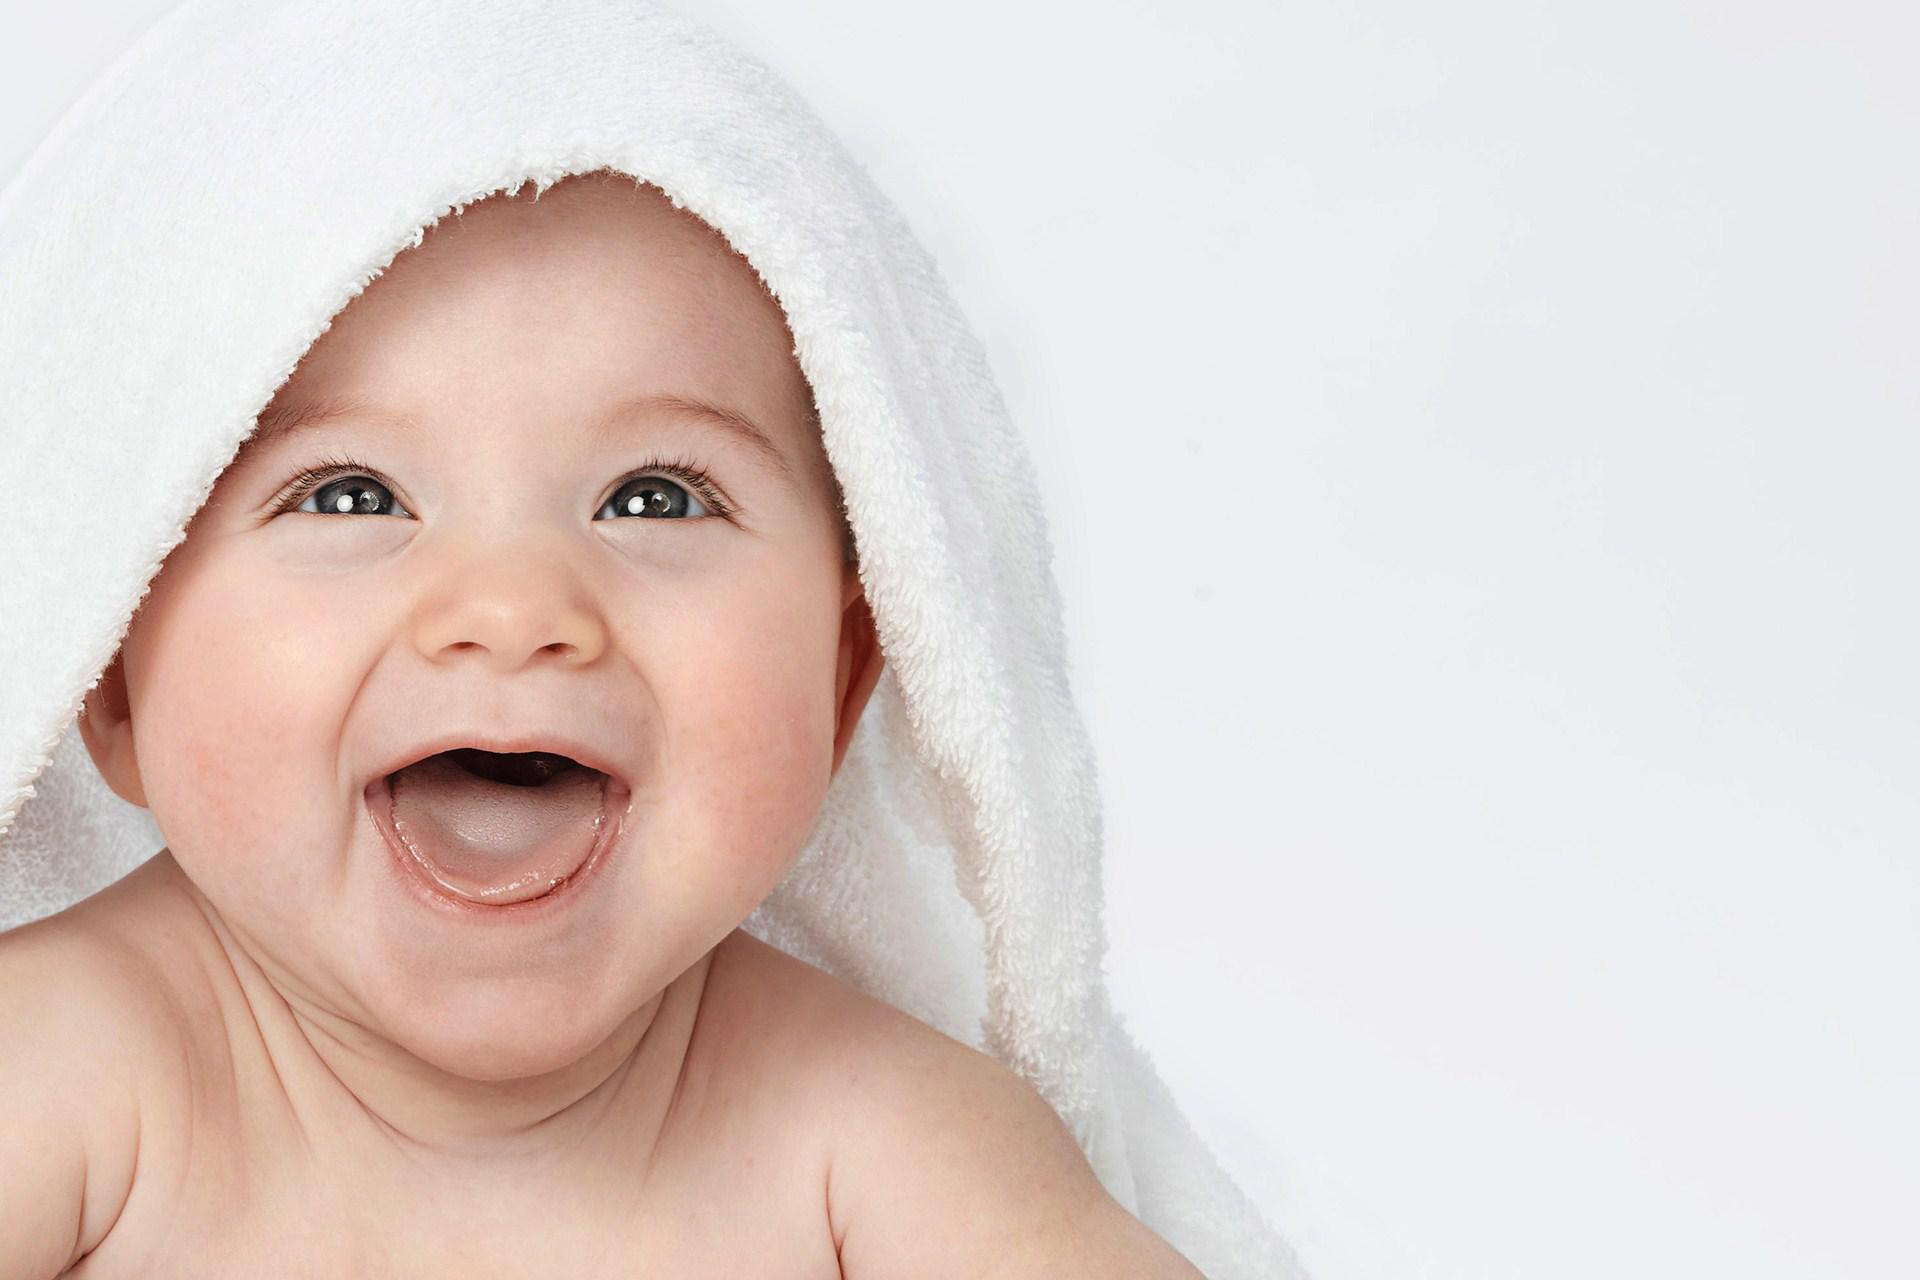 baby wallpaper hd,child,baby,face,skin,facial expression